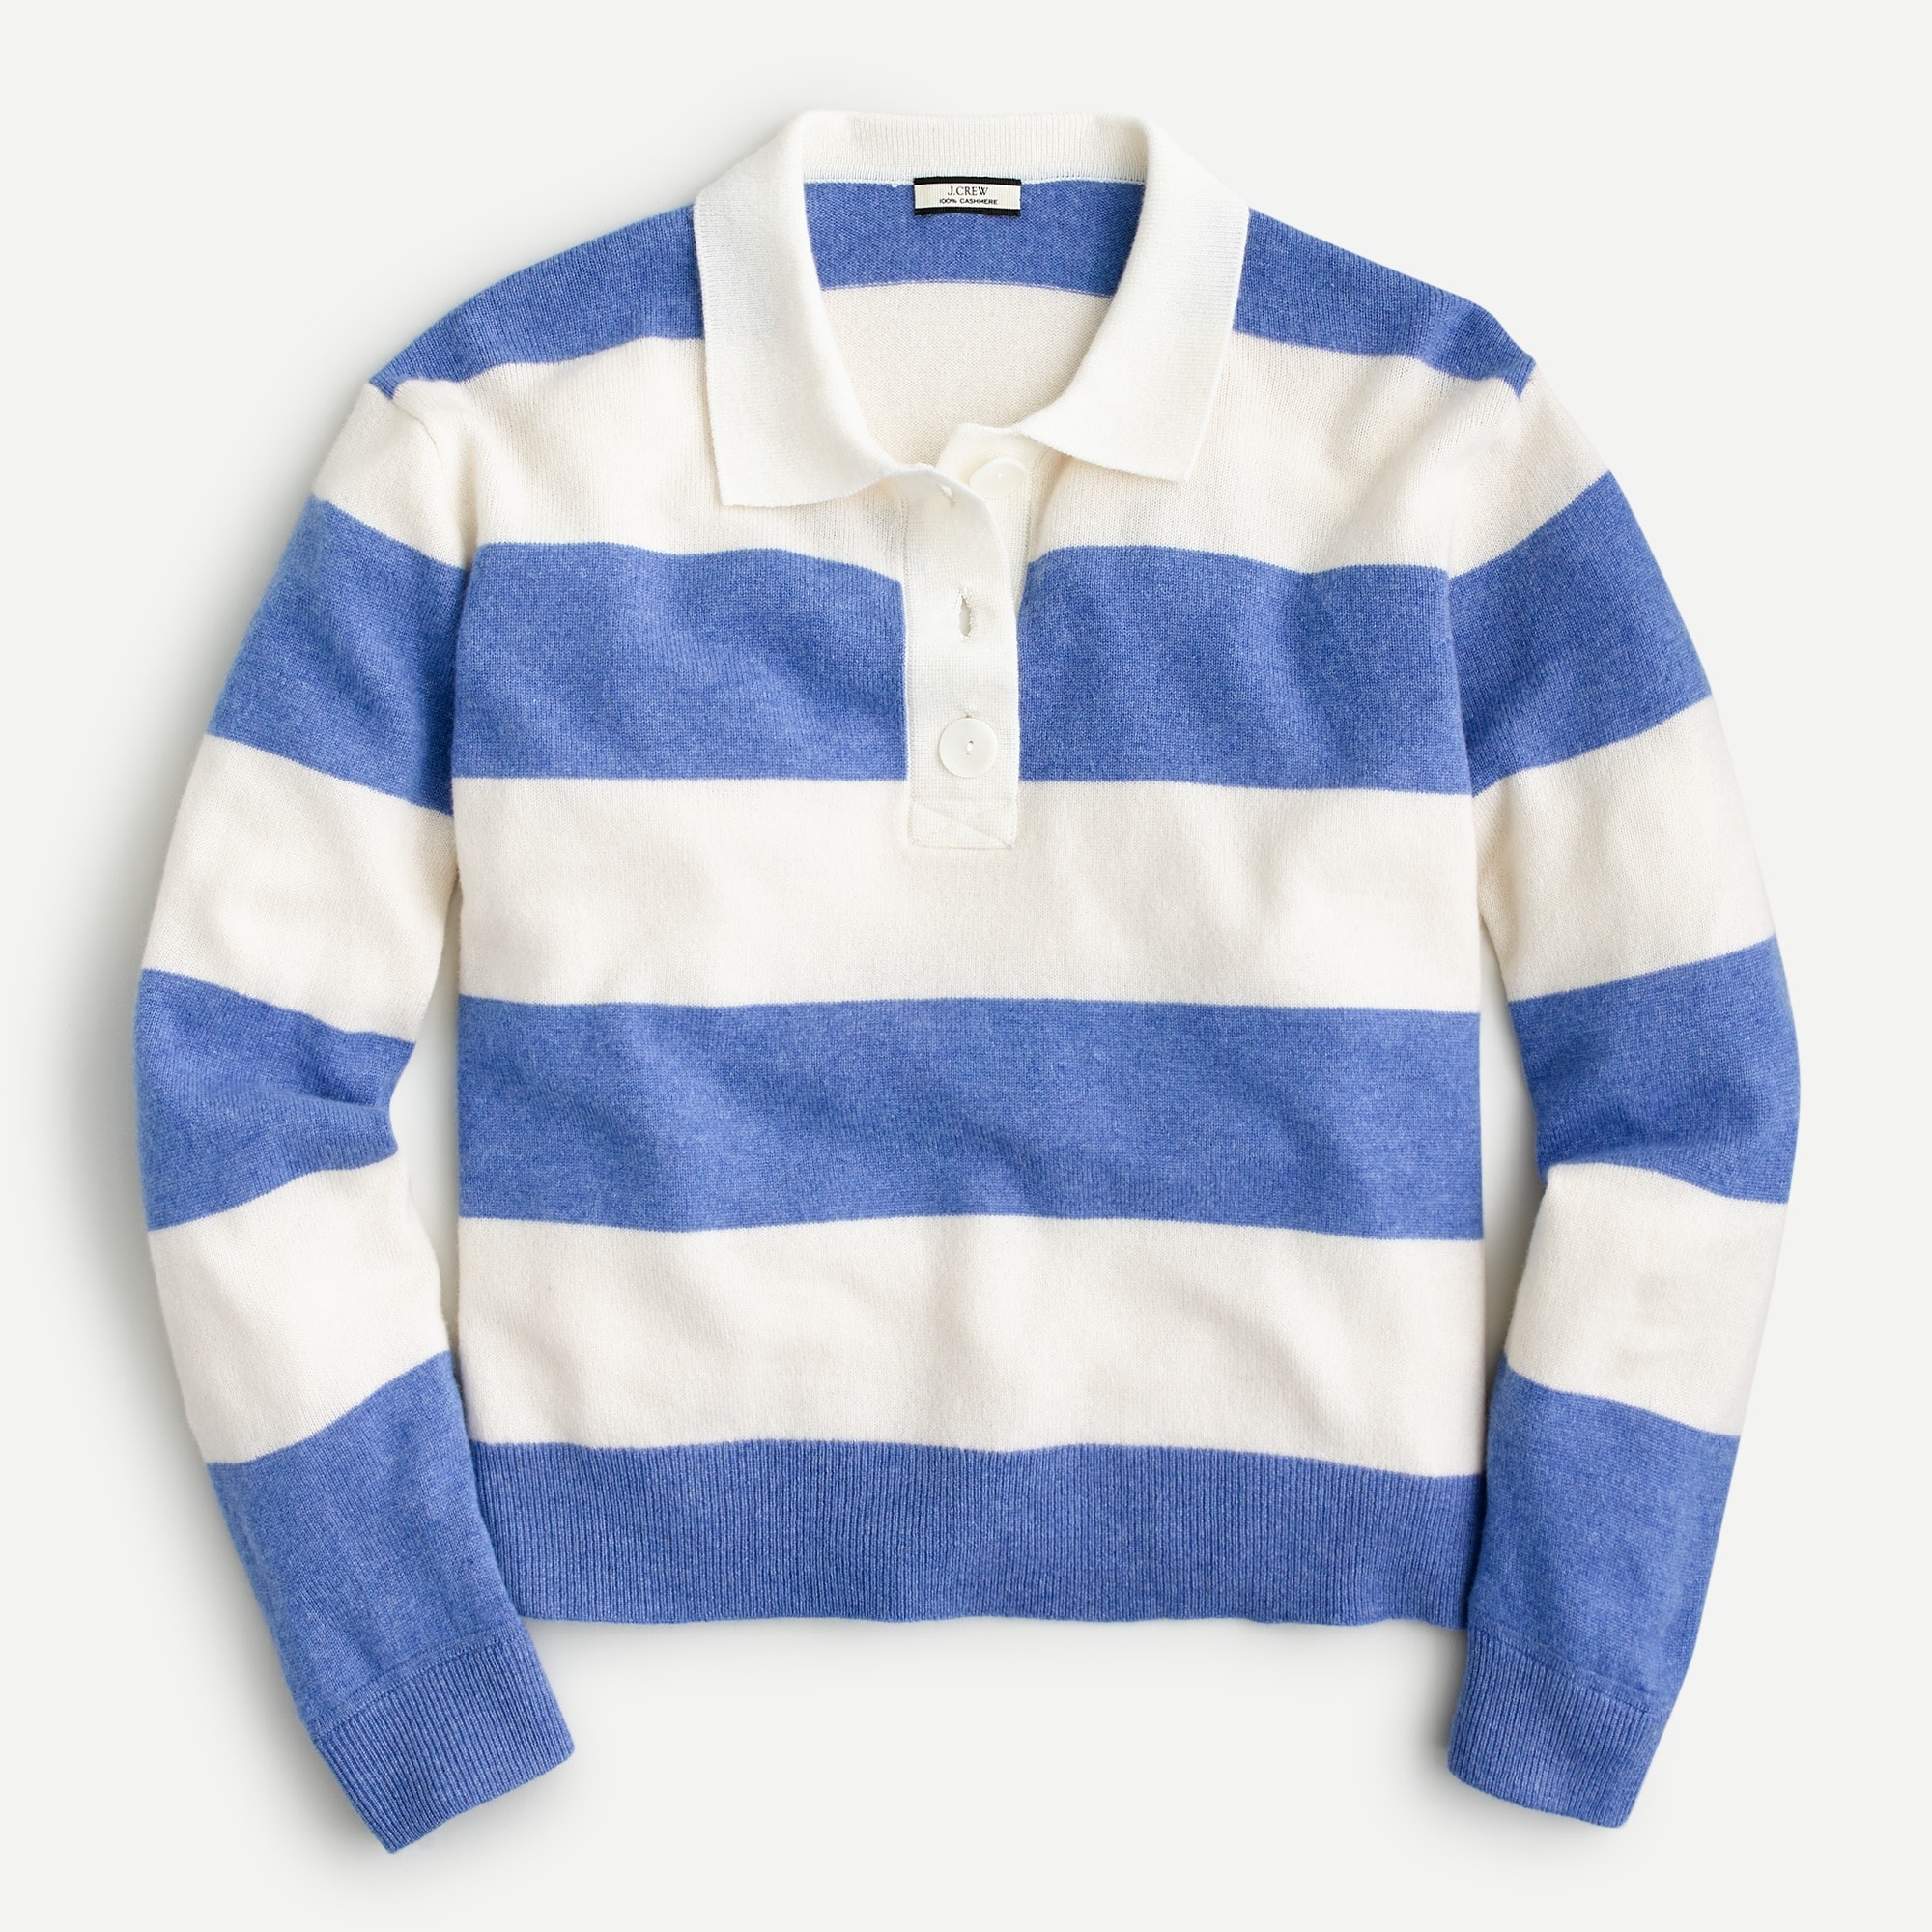 J.Crew: Collared Cashmere Sweater In Rugby Stripe For Women